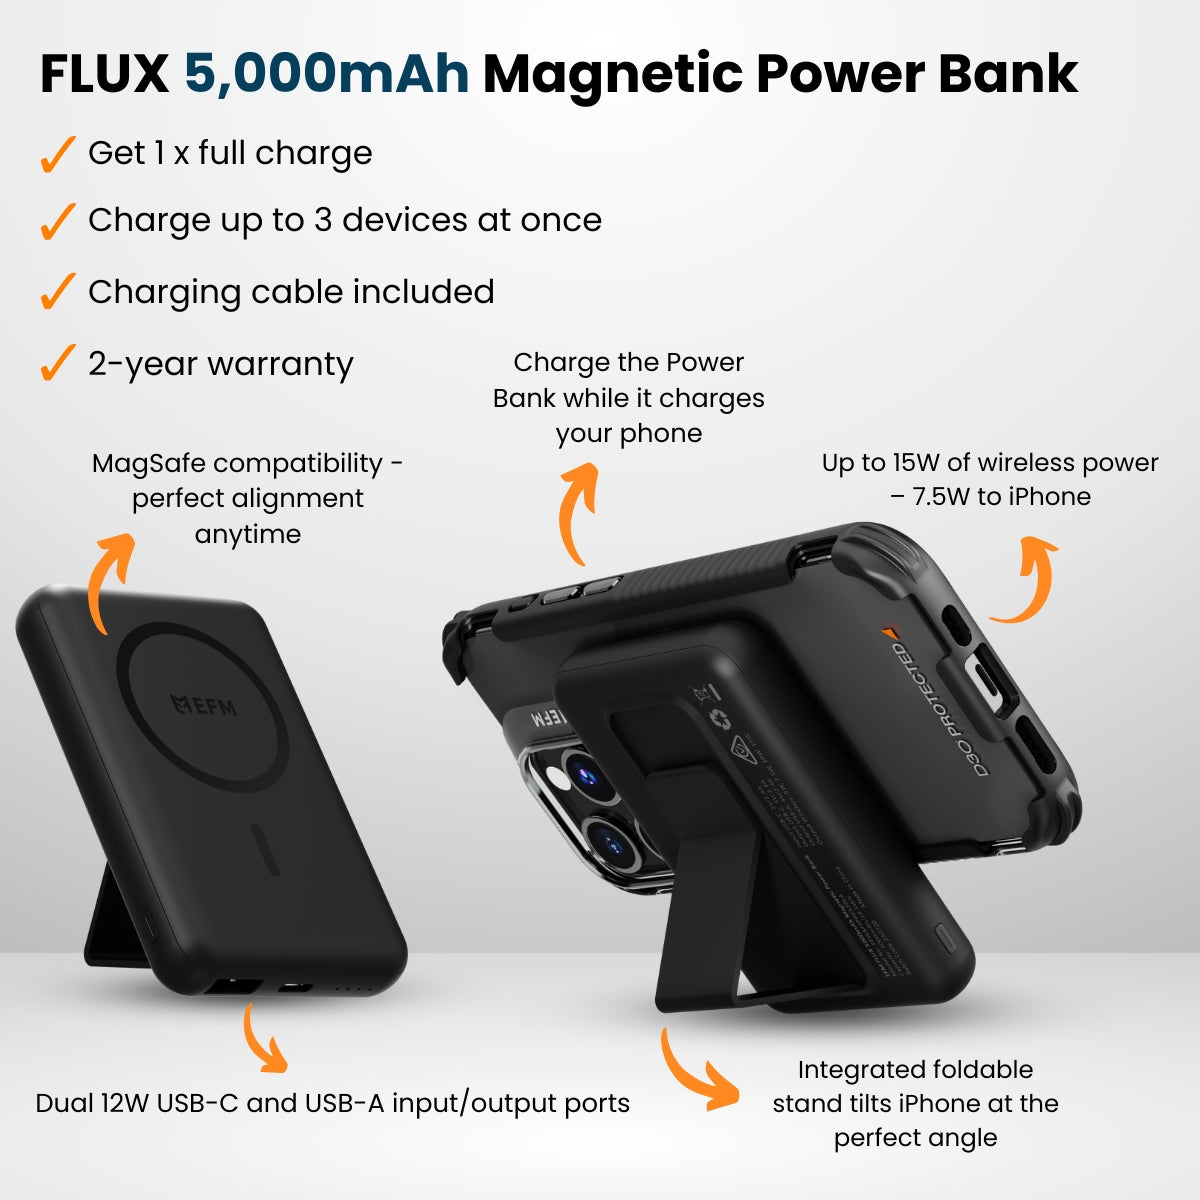 EFM FLUX 5 000mAh Magnetic Power Bank - With MagSafe Compatability and Foldable Stand - Black-3